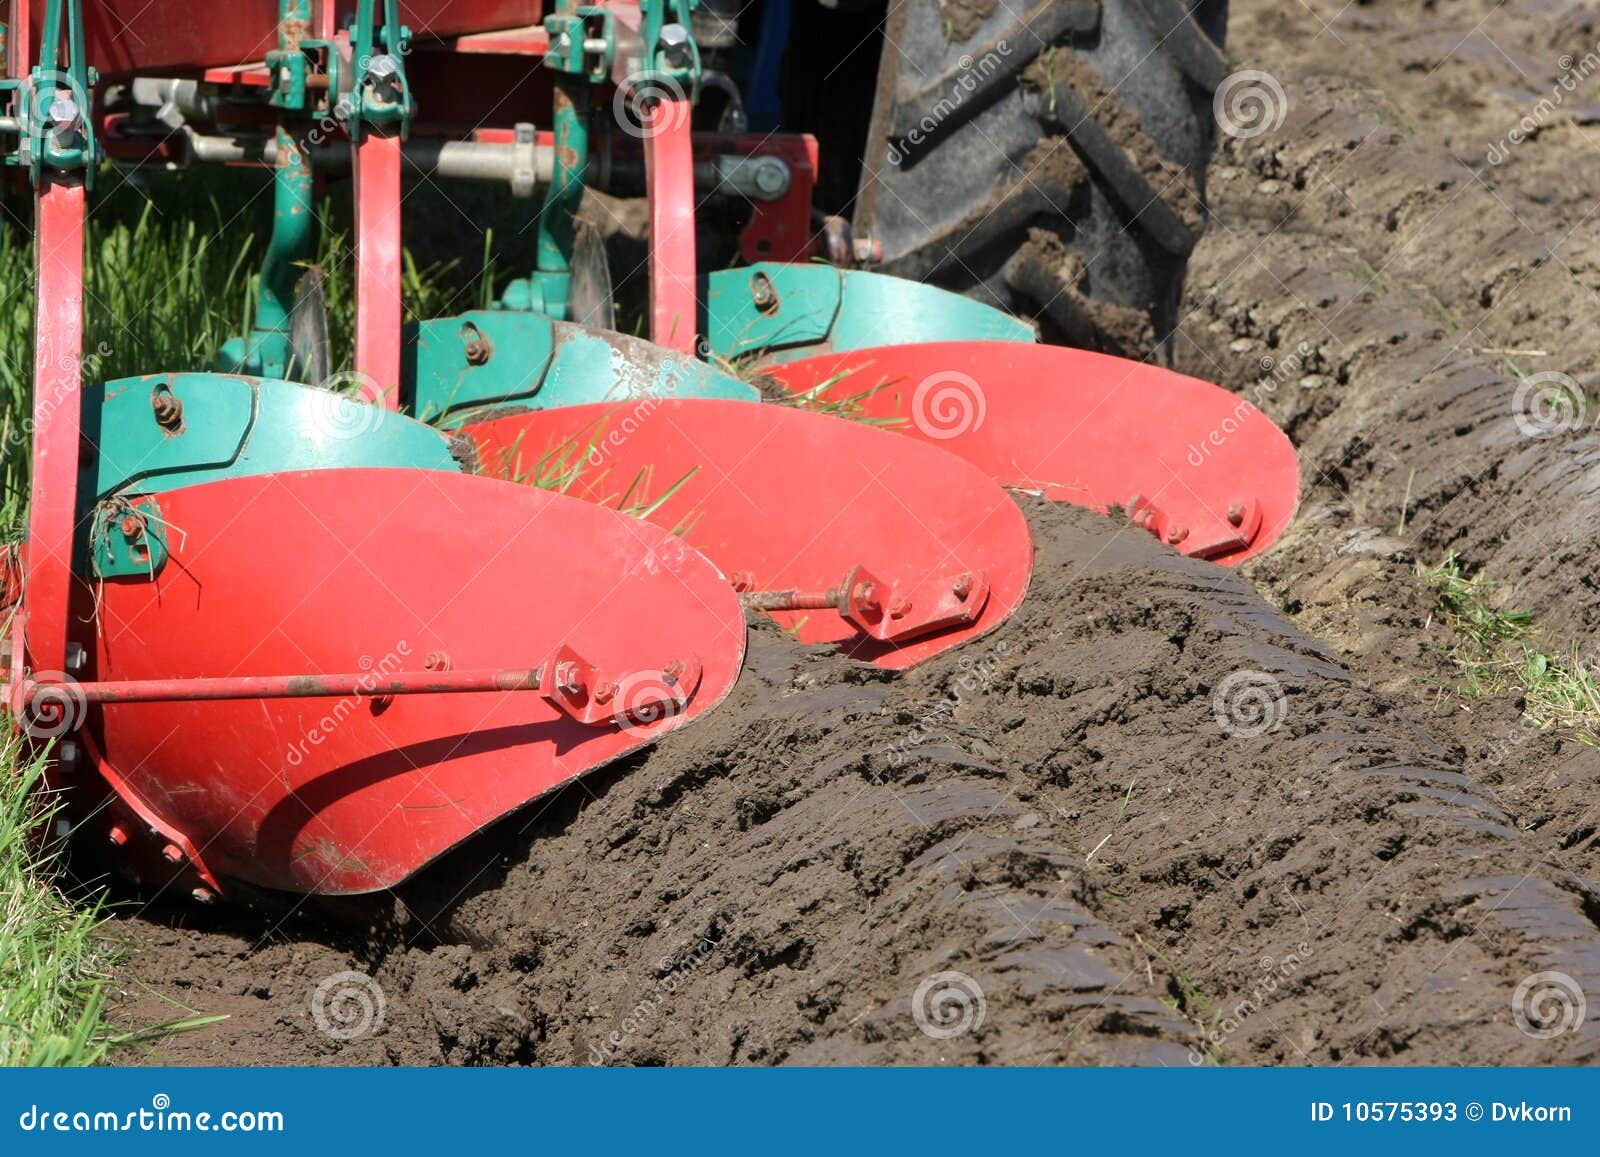 plough and tractor